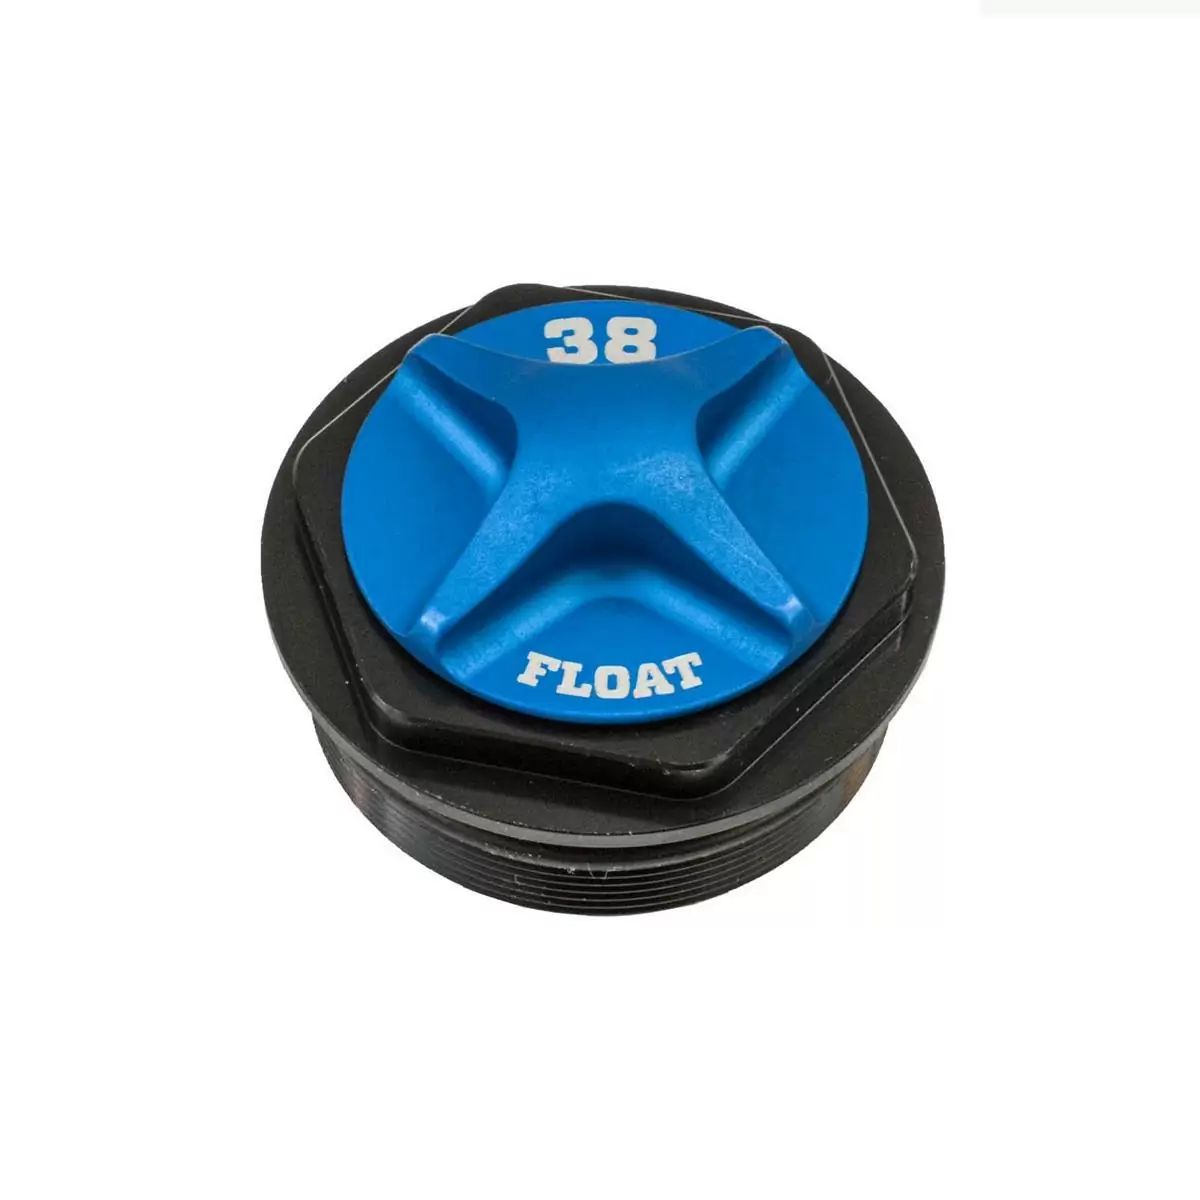 38 Float NA2 Topcap Assy with Air Cap - image